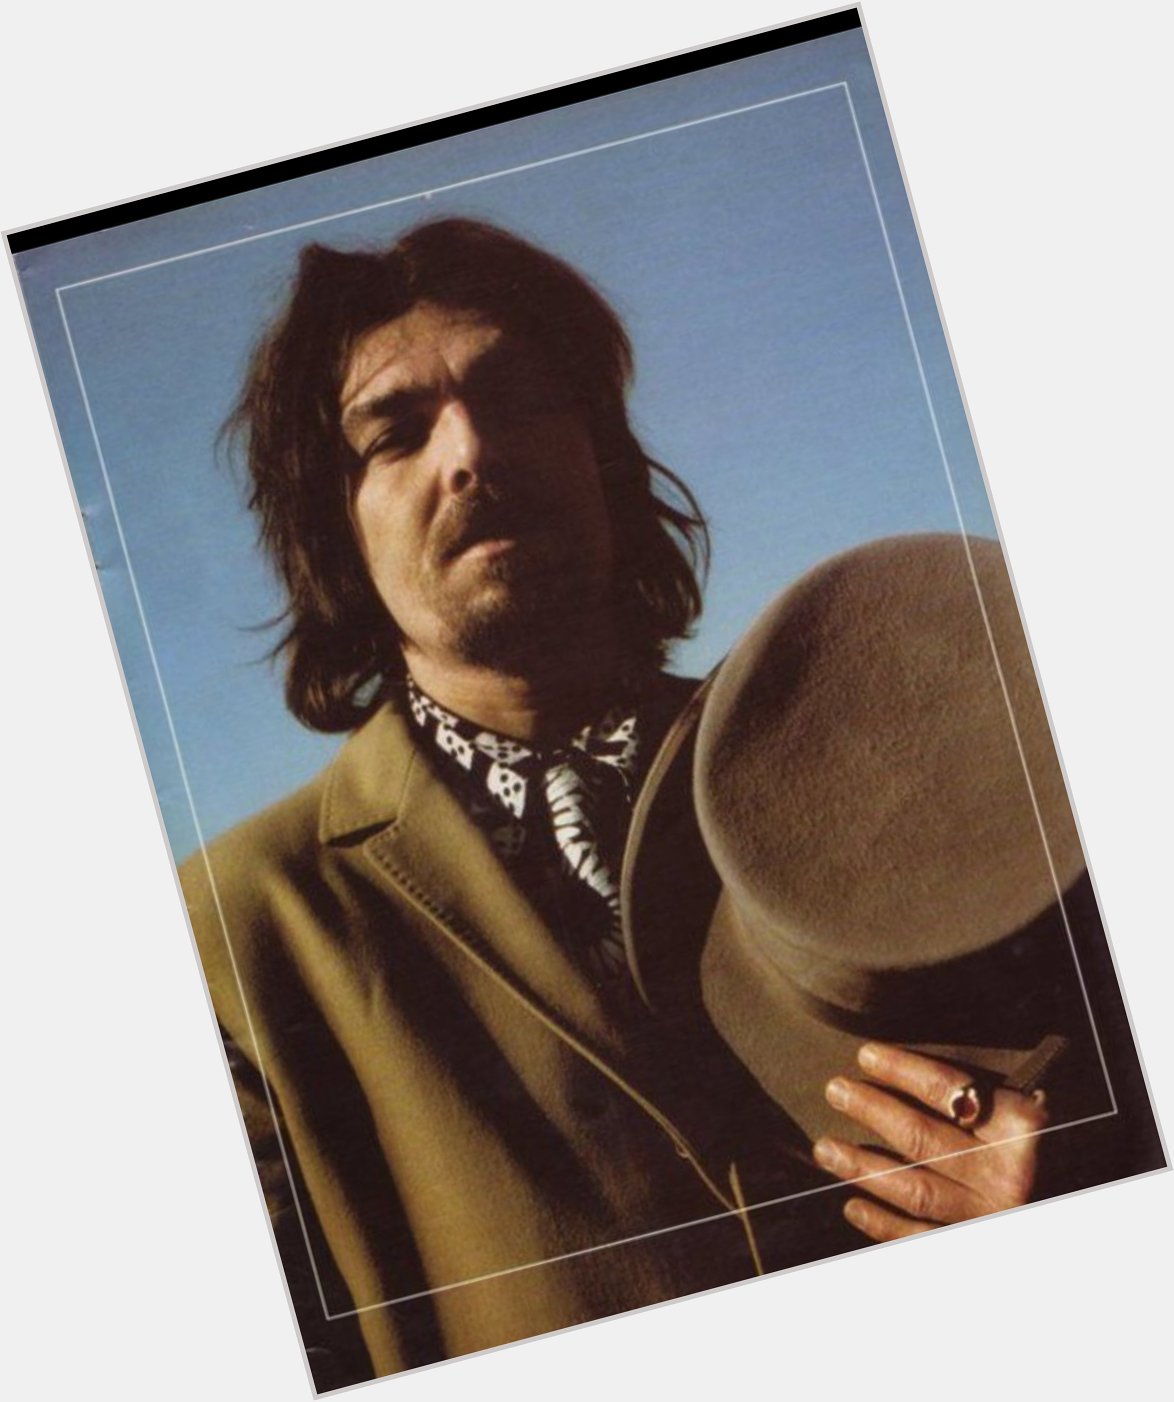 Happy Birthday, Don Van Vliet! As Captain Beefheart you took your Magic Band to new heights. RIP 